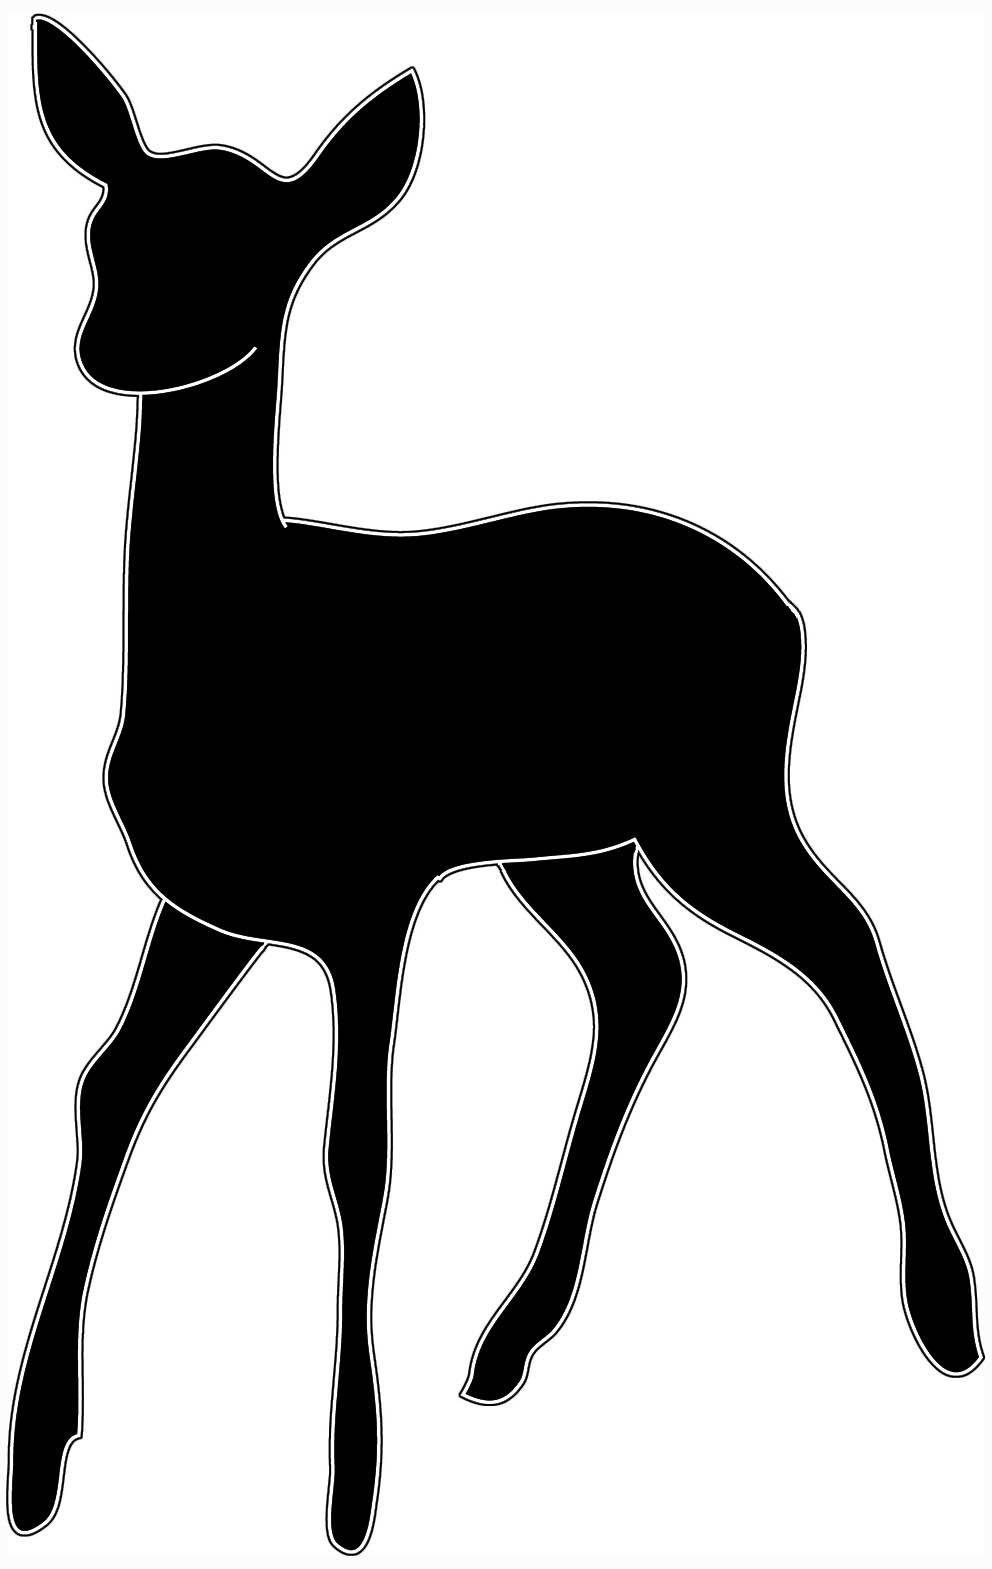 Deer Head Clipart Black And White.